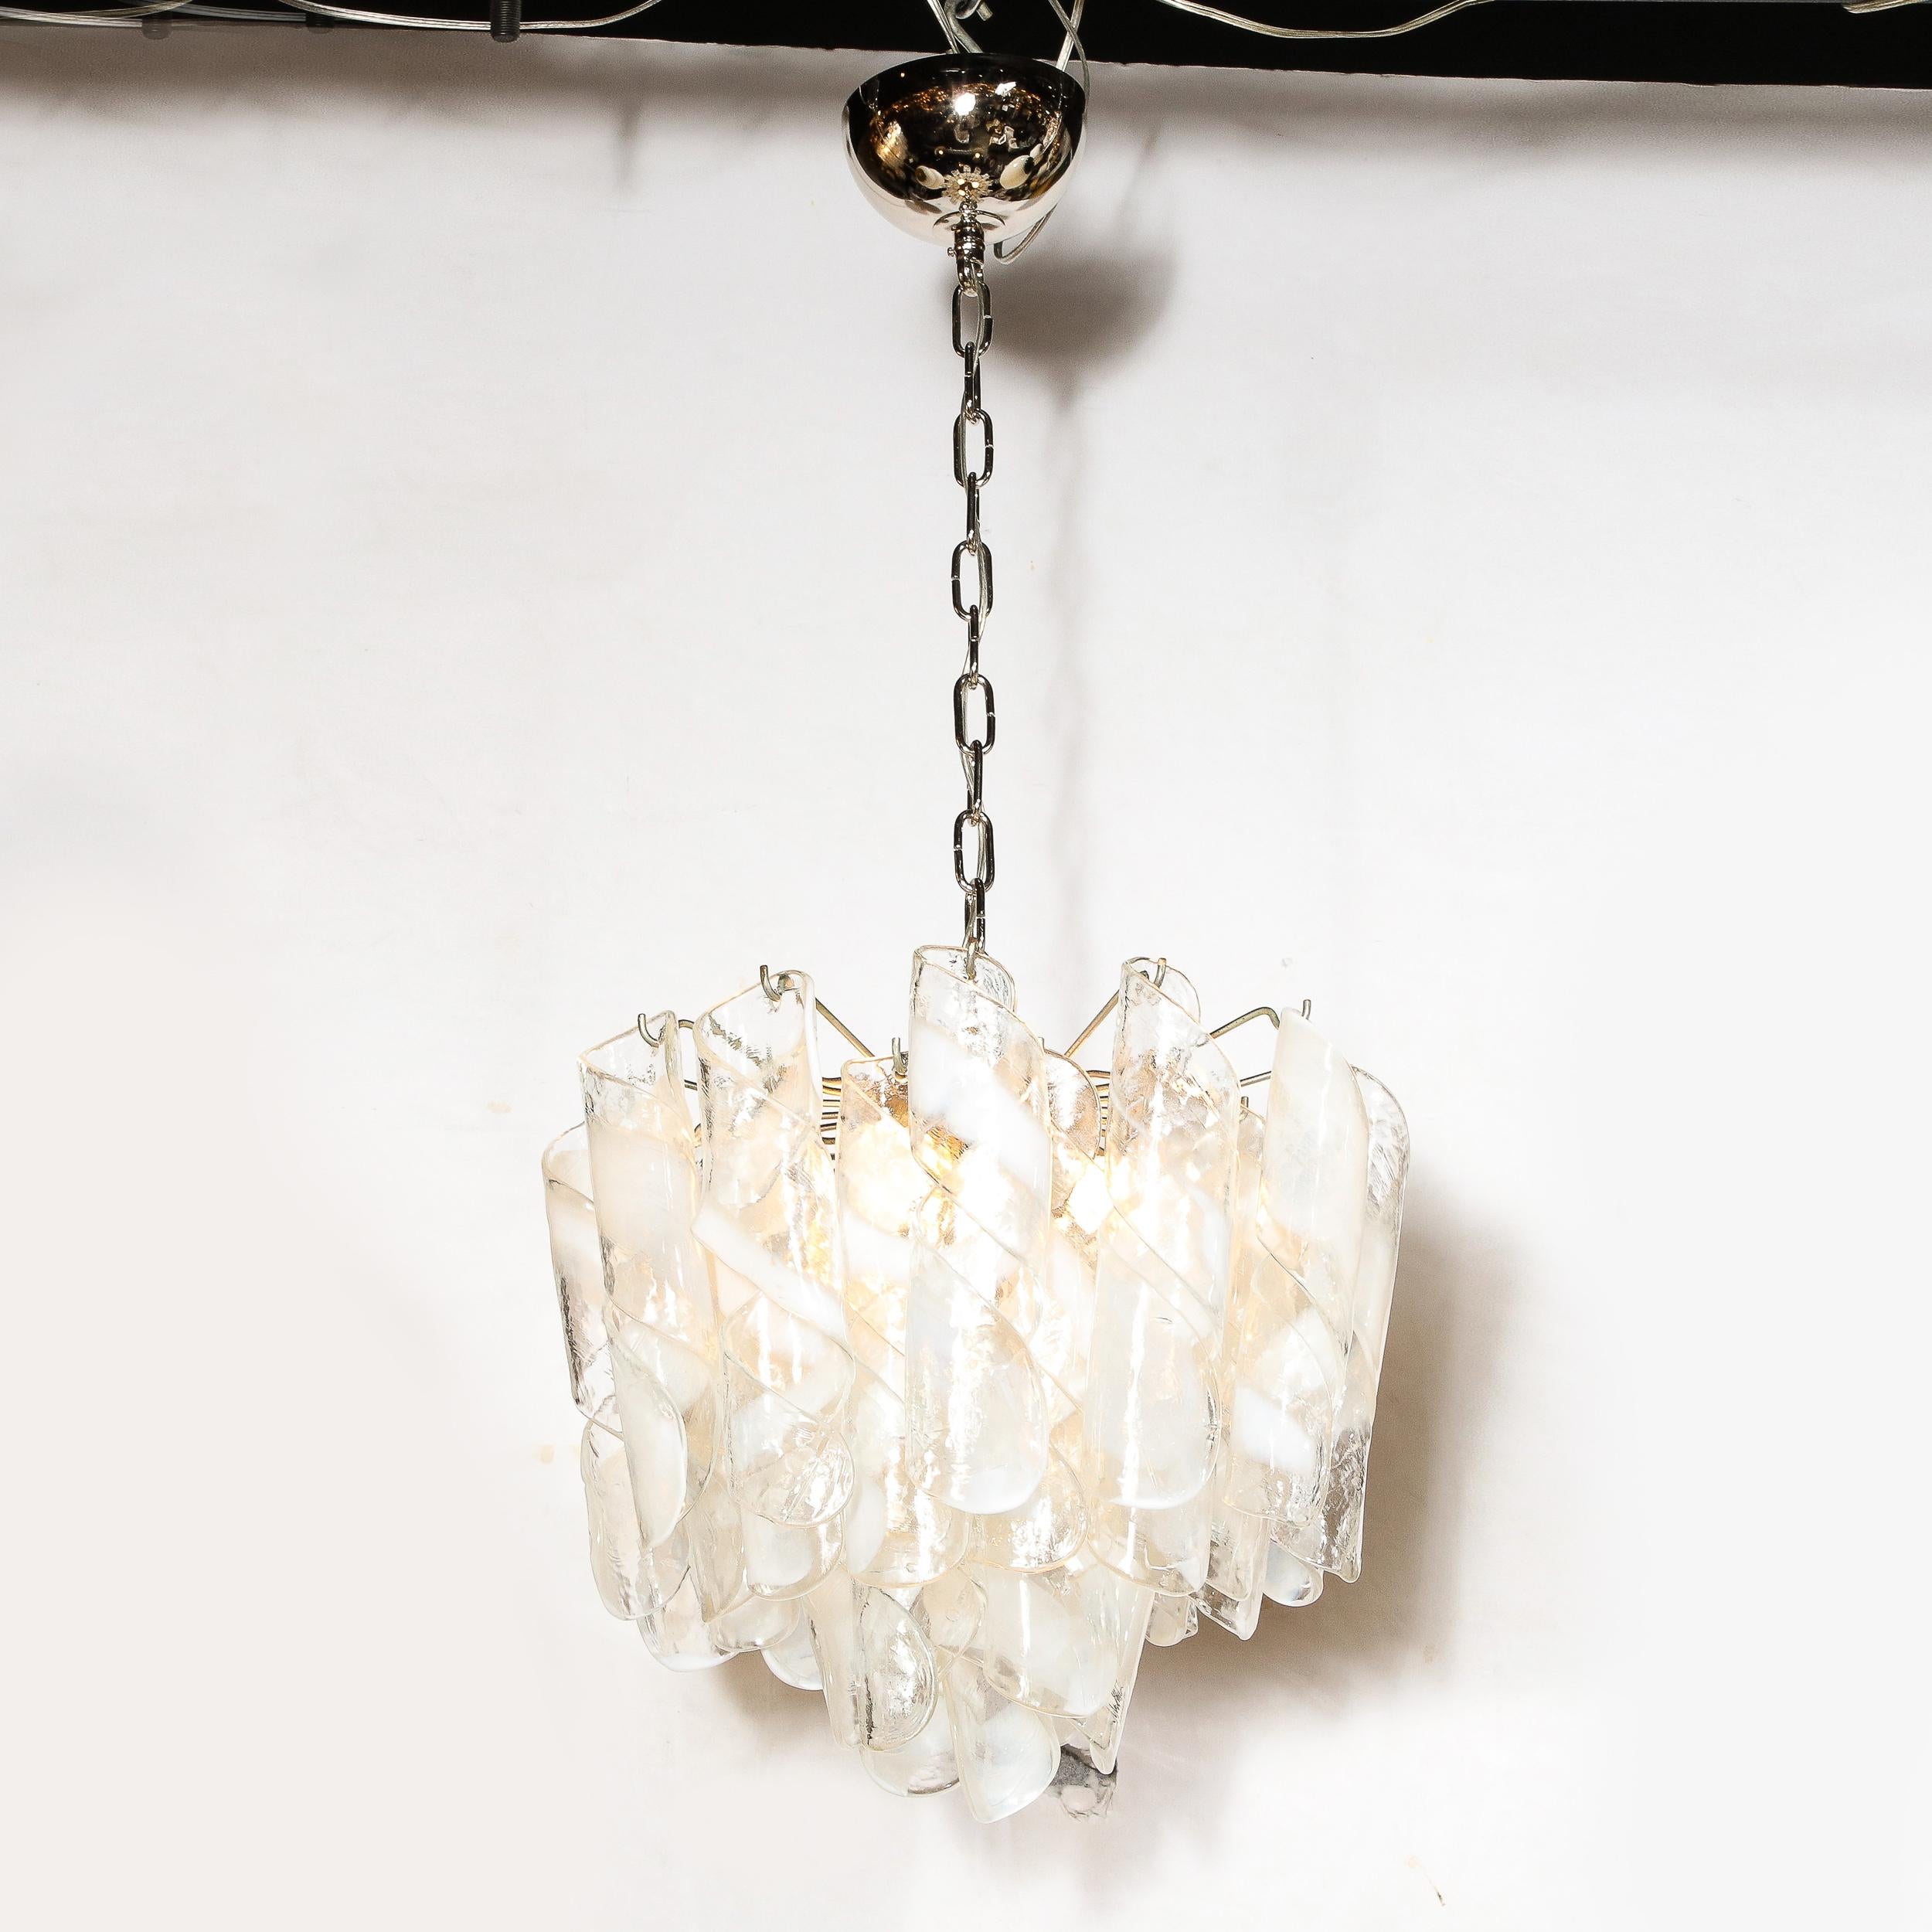 Mid-Century Modernist Hand-Blown Murano Glass Torciglioni Chandelier By Mazzega For Sale 4